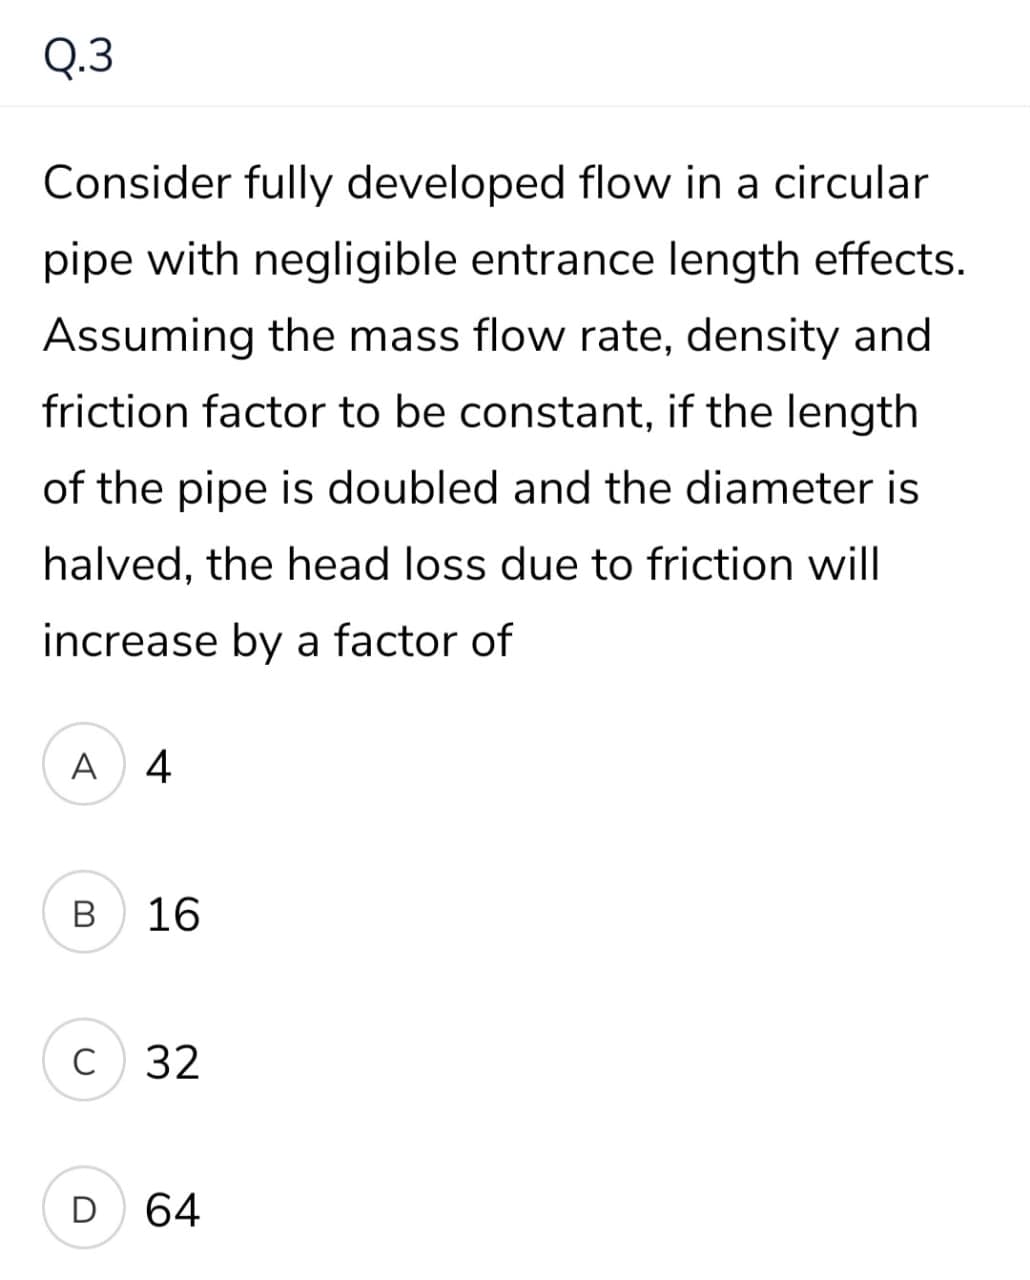 Q.3
Consider fully developed flow in a circular
pipe with negligible entrance length effects.
Assuming the mass flow rate, density and
friction factor to be constant, if the length
of the pipe is doubled and the diameter is
halved, the head loss due to friction will
increase by a factor of
A 4
16
C 32
D
64
